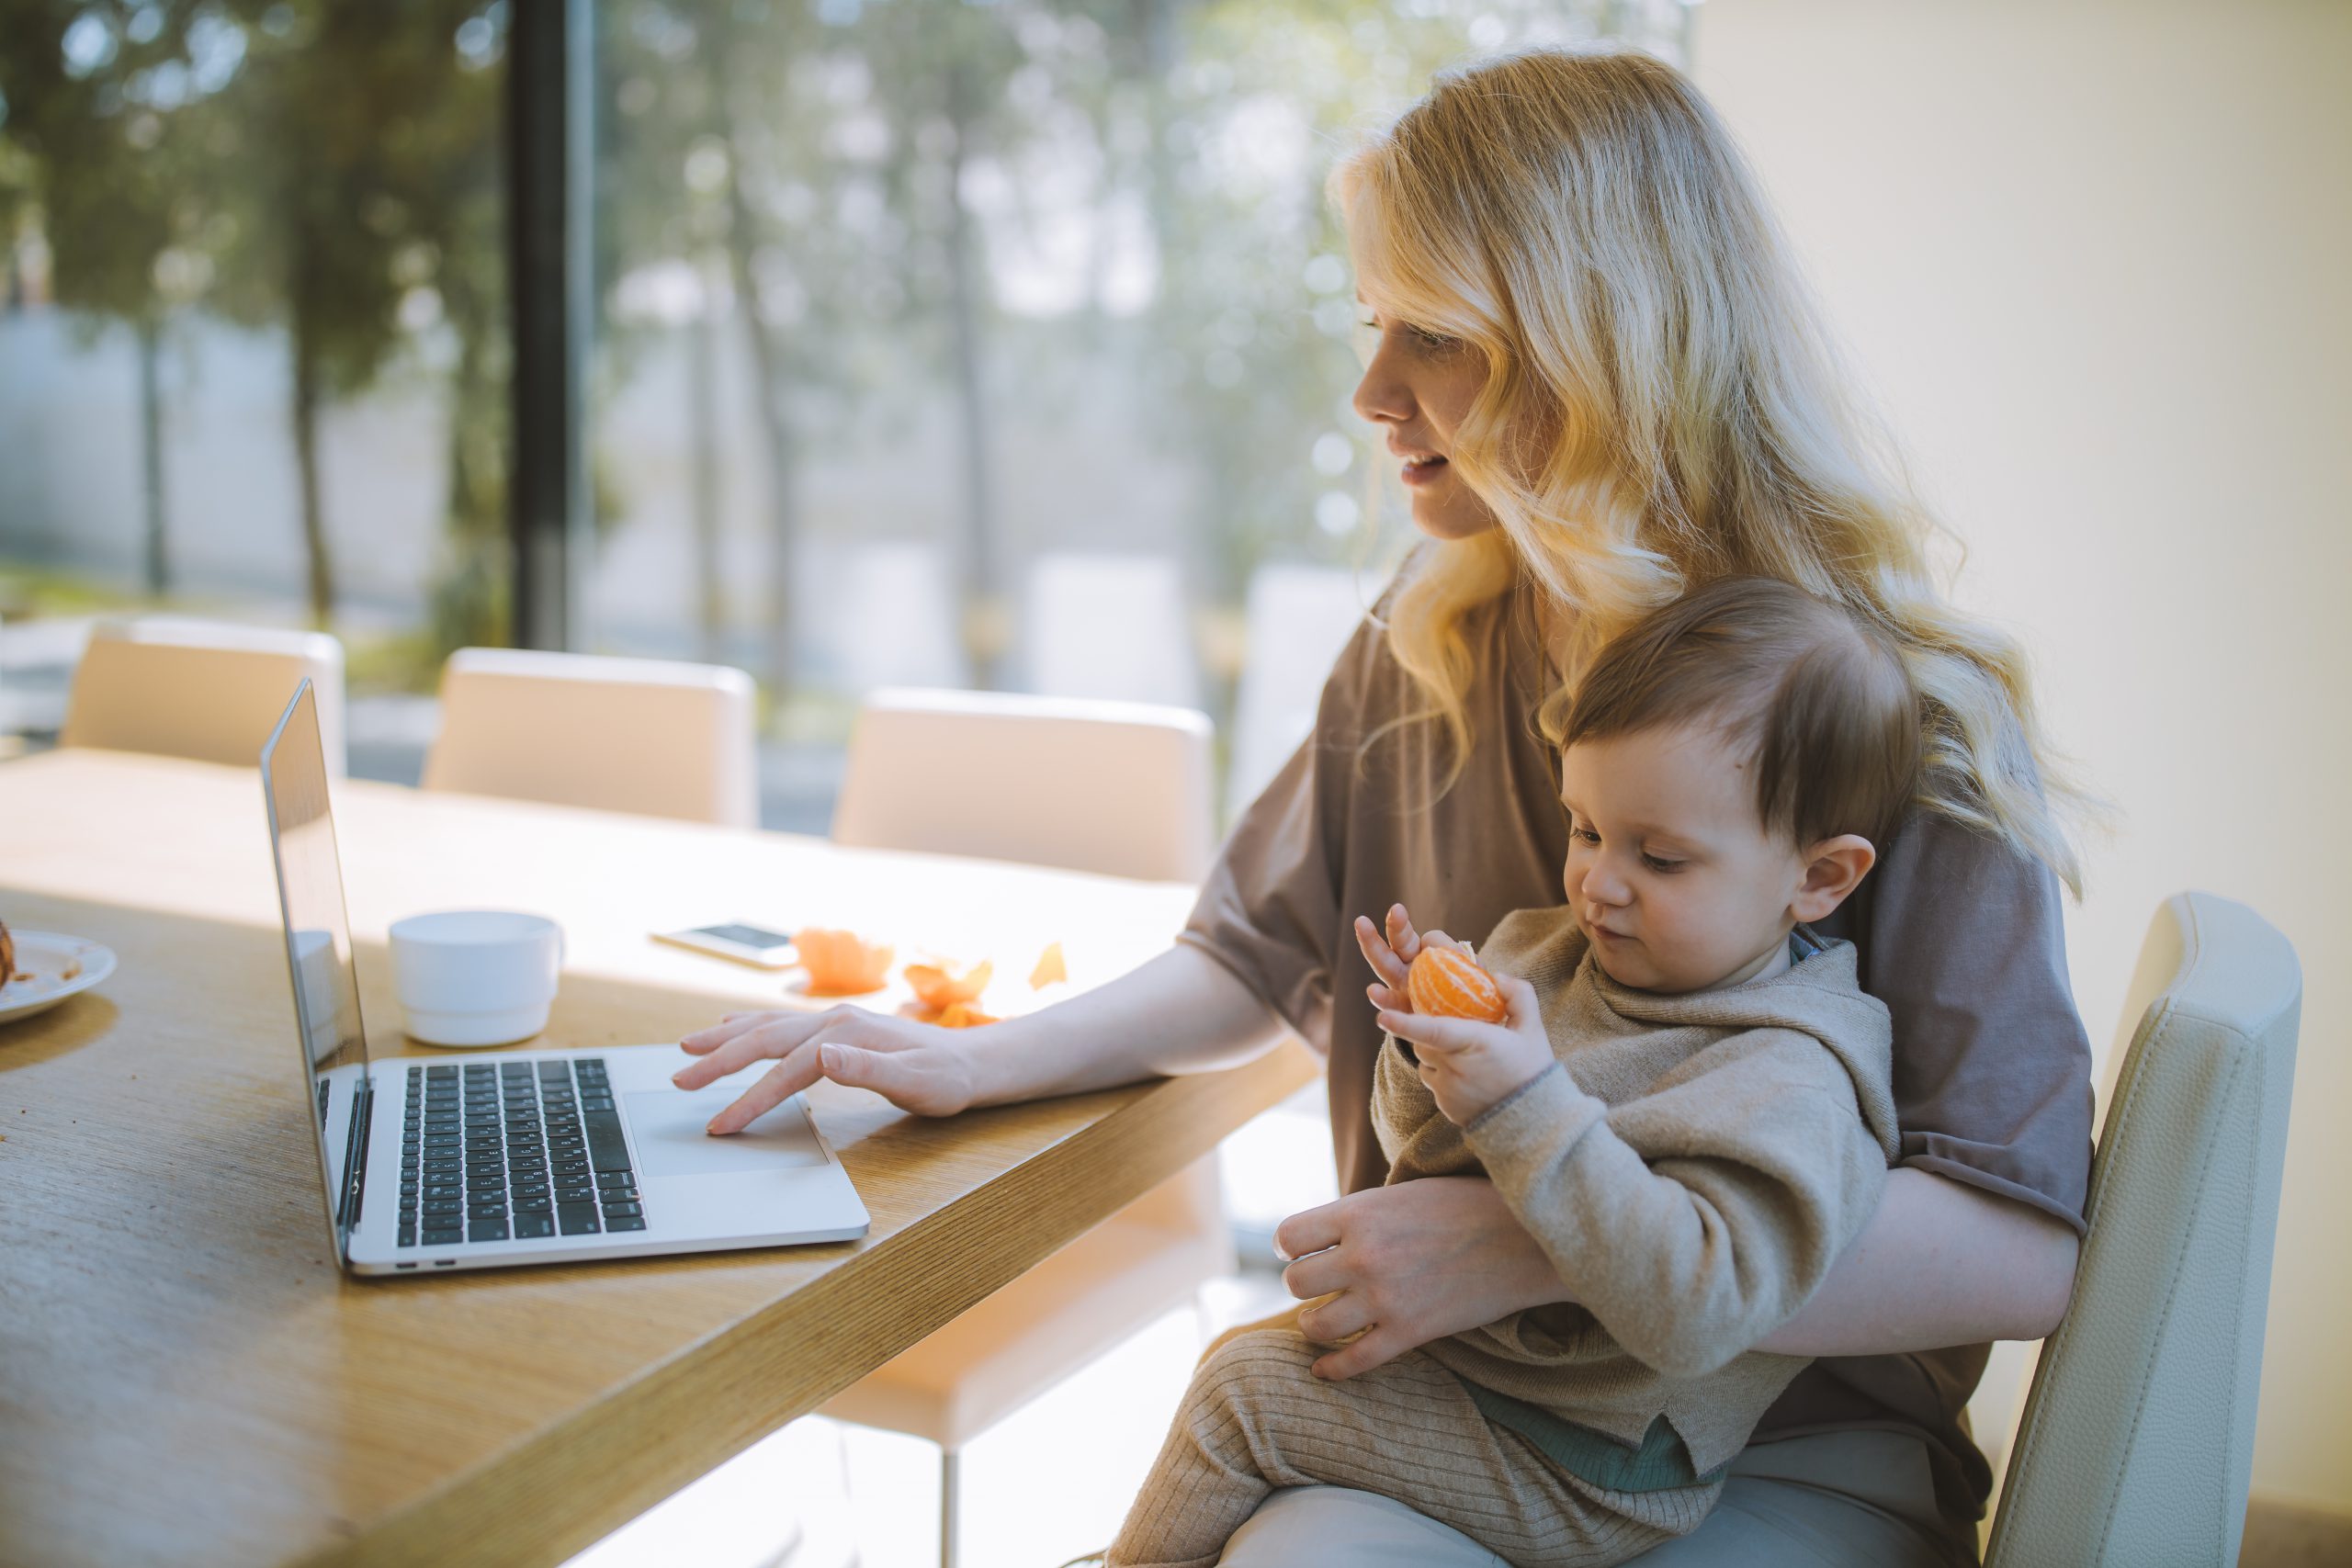 Woman holding baby while working on laptop.